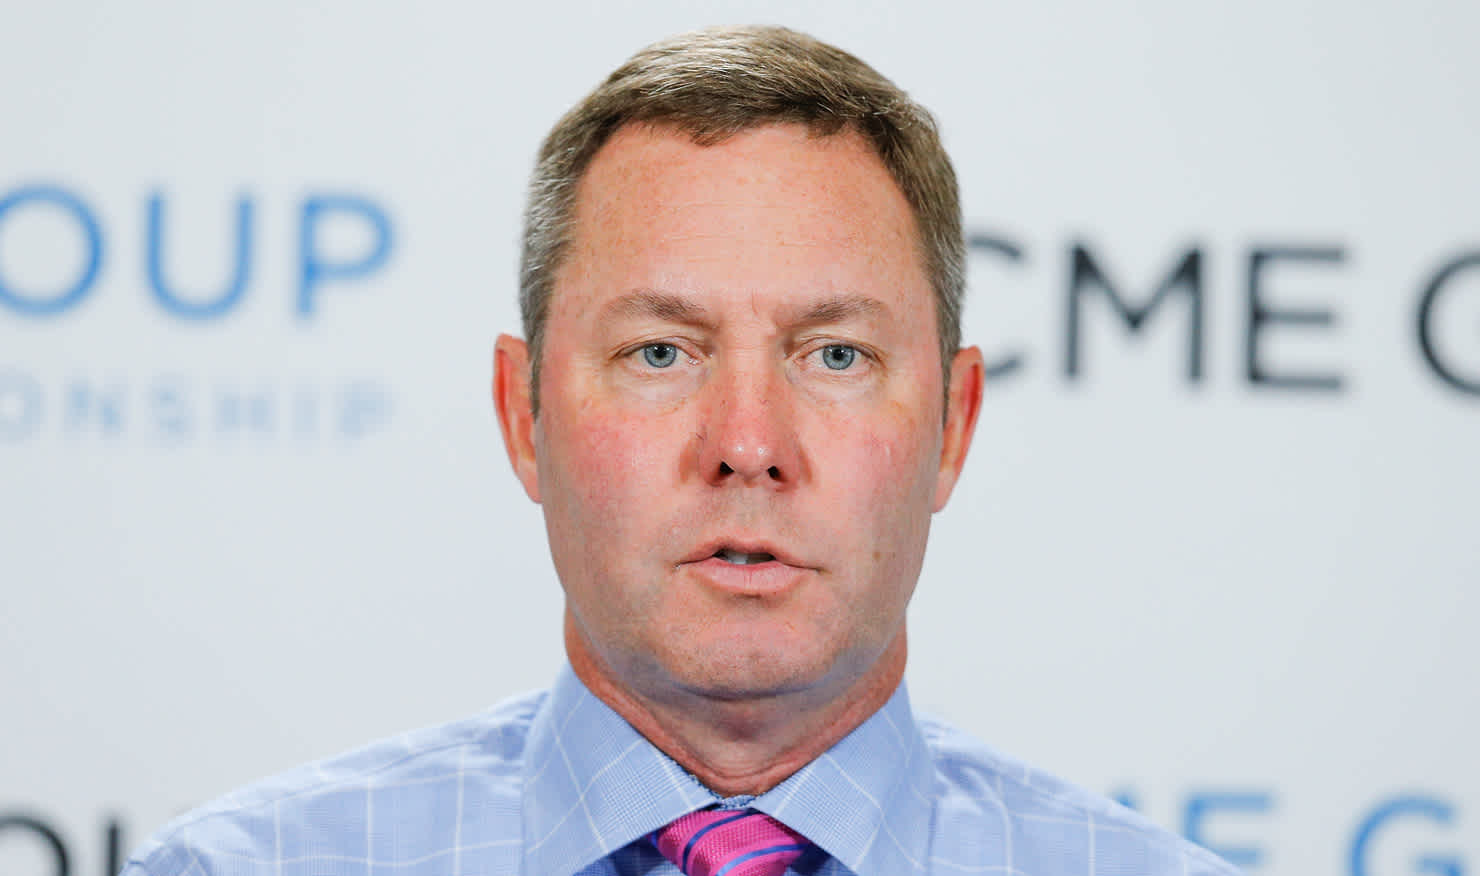 Mike Whan is revered for his work in modernising and expanding the LPGA Tour.